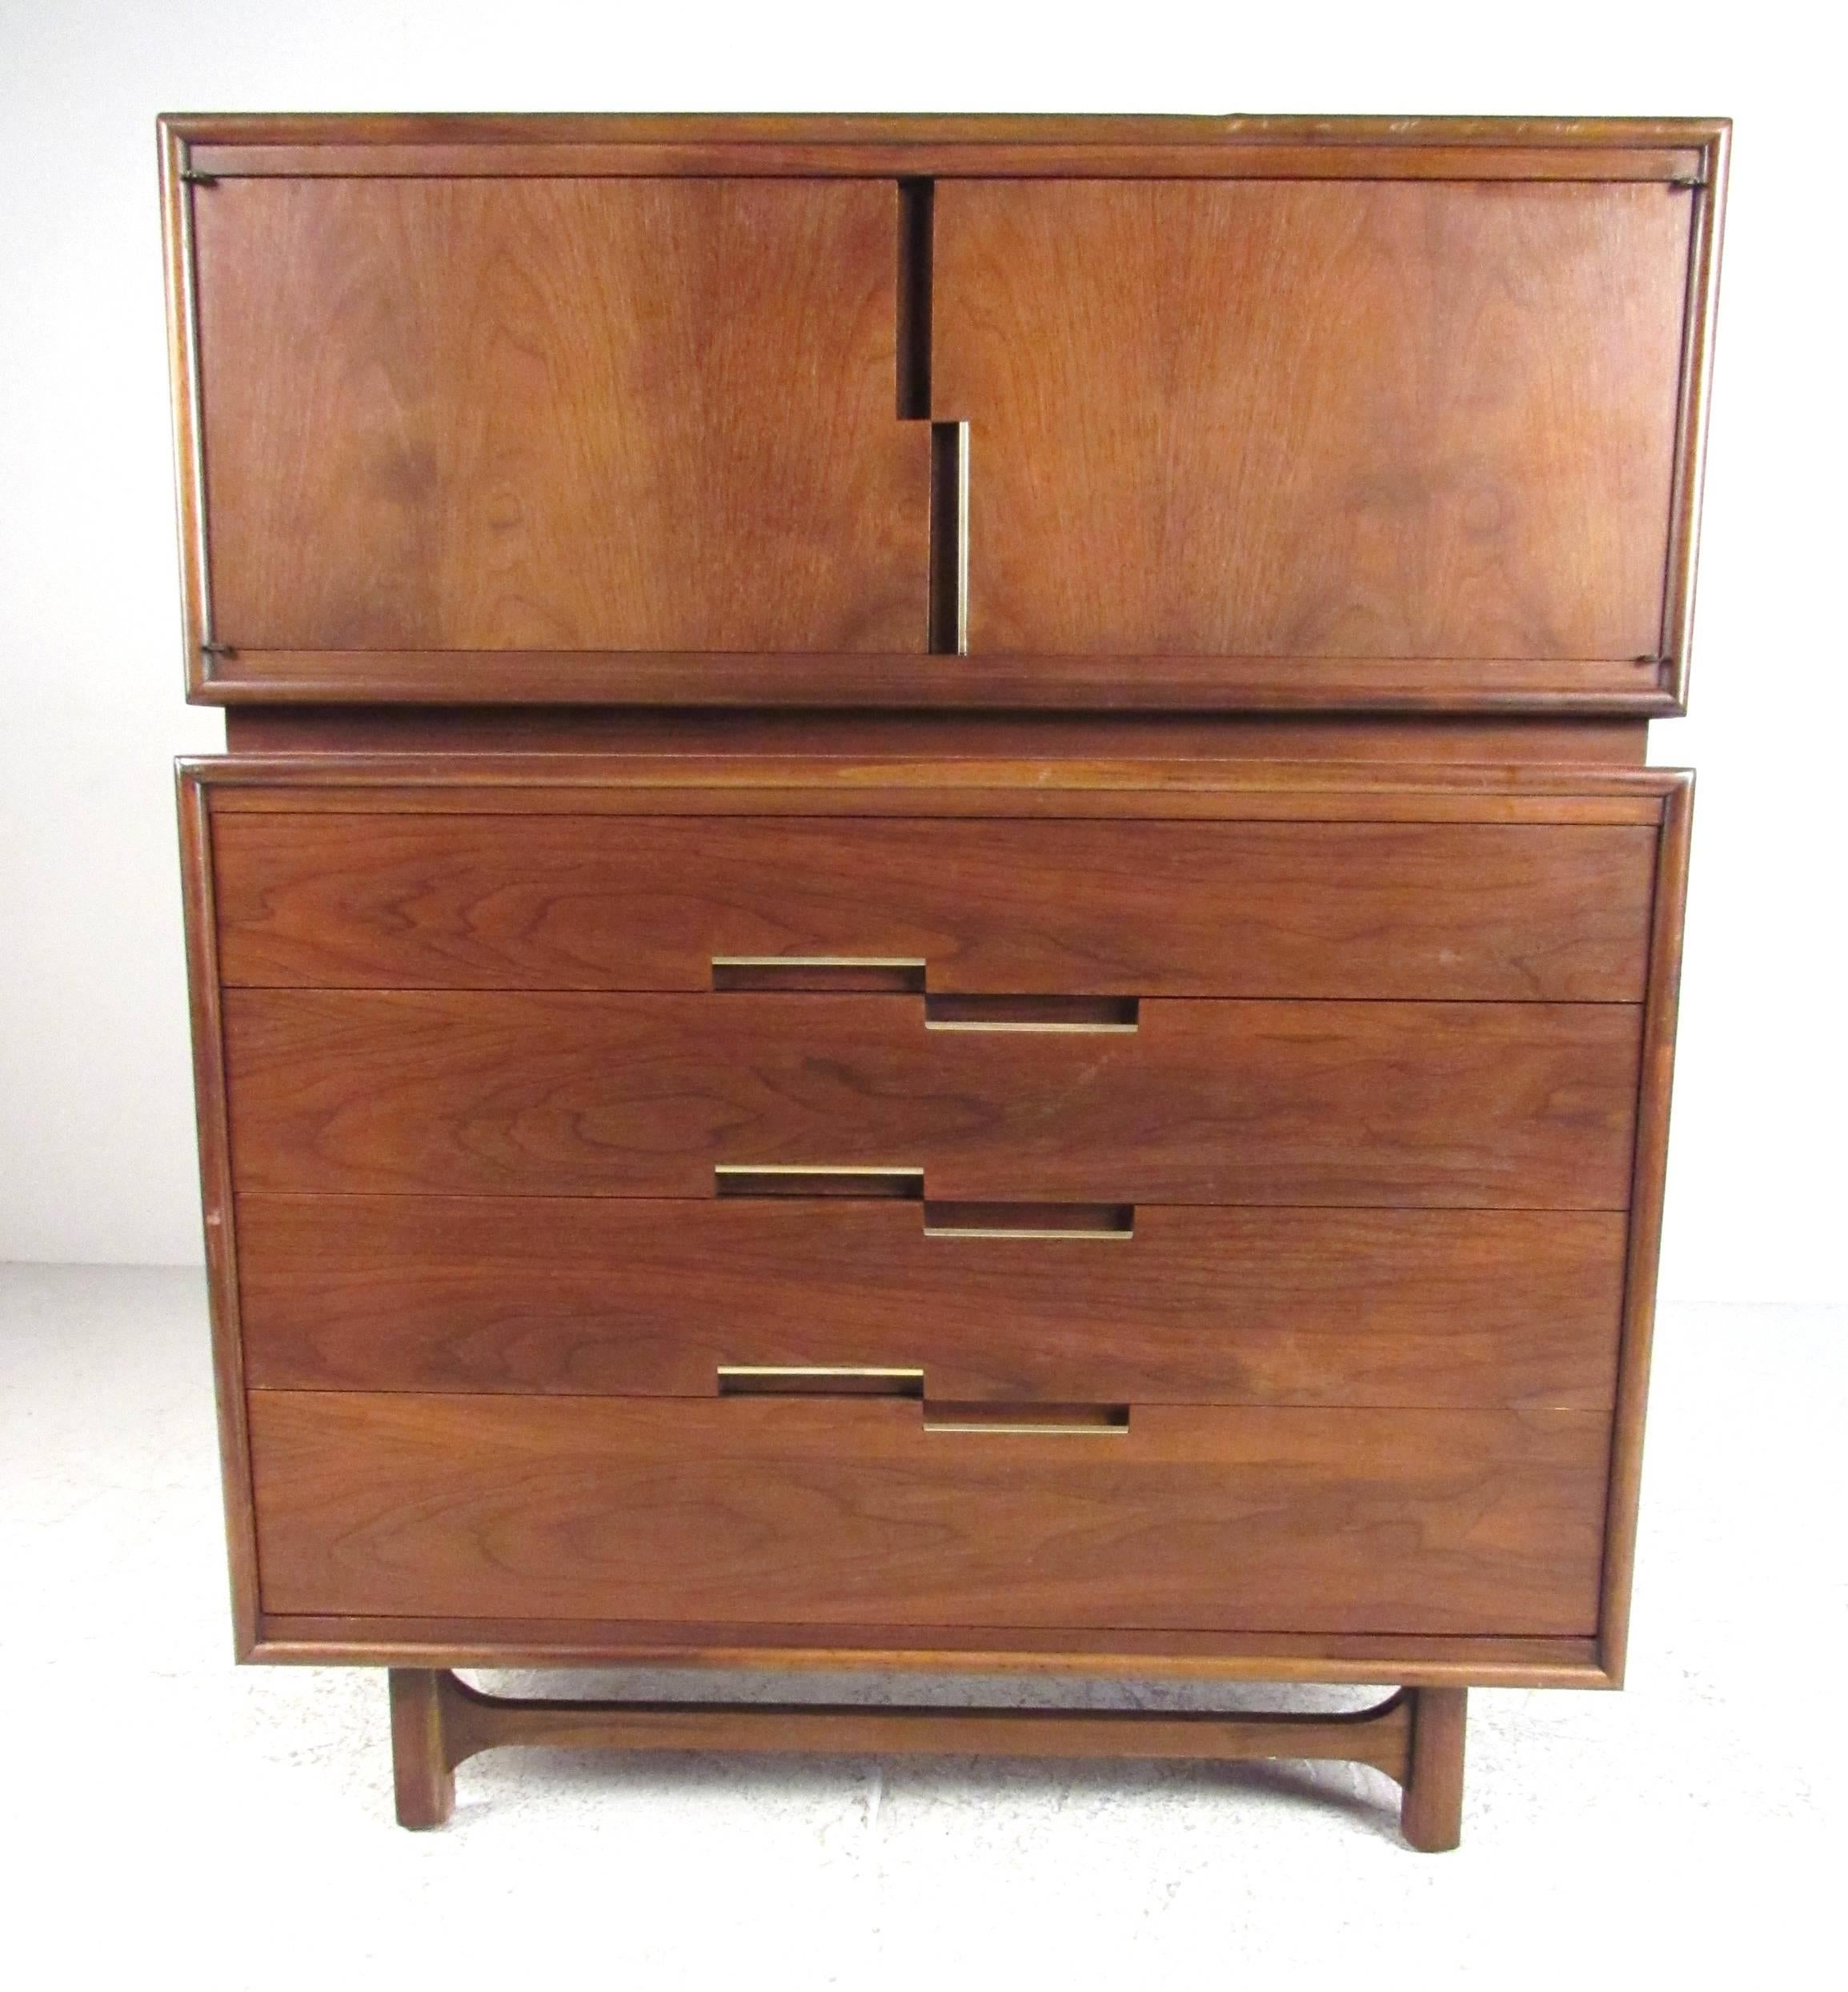 High quality mid-century walnut dresser produced by Cavalier. Two door cabinet on top containing two notch top drawers and shelf storage. Four drawers below with two partitioned and one cedar lined. Recessed pulls with metal trim. Please confirm